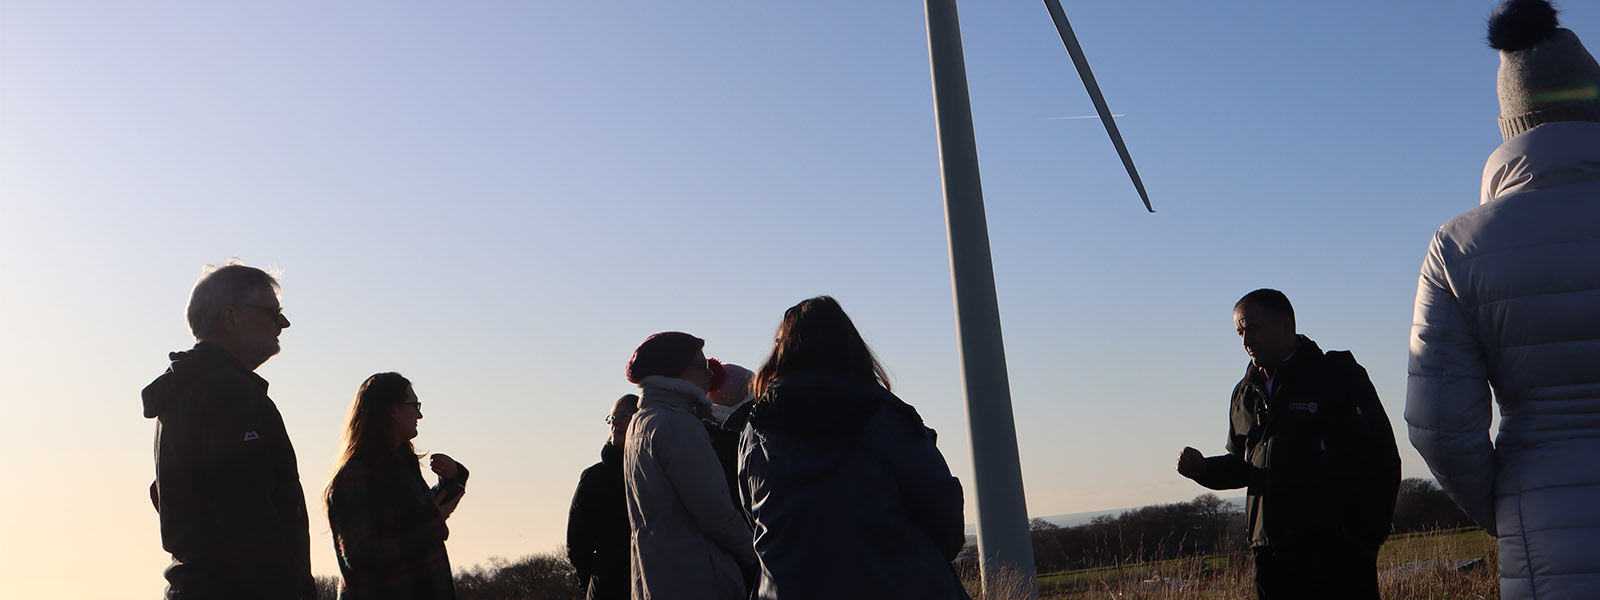 The Sustainability Manager hosting a tour of the wind turbine